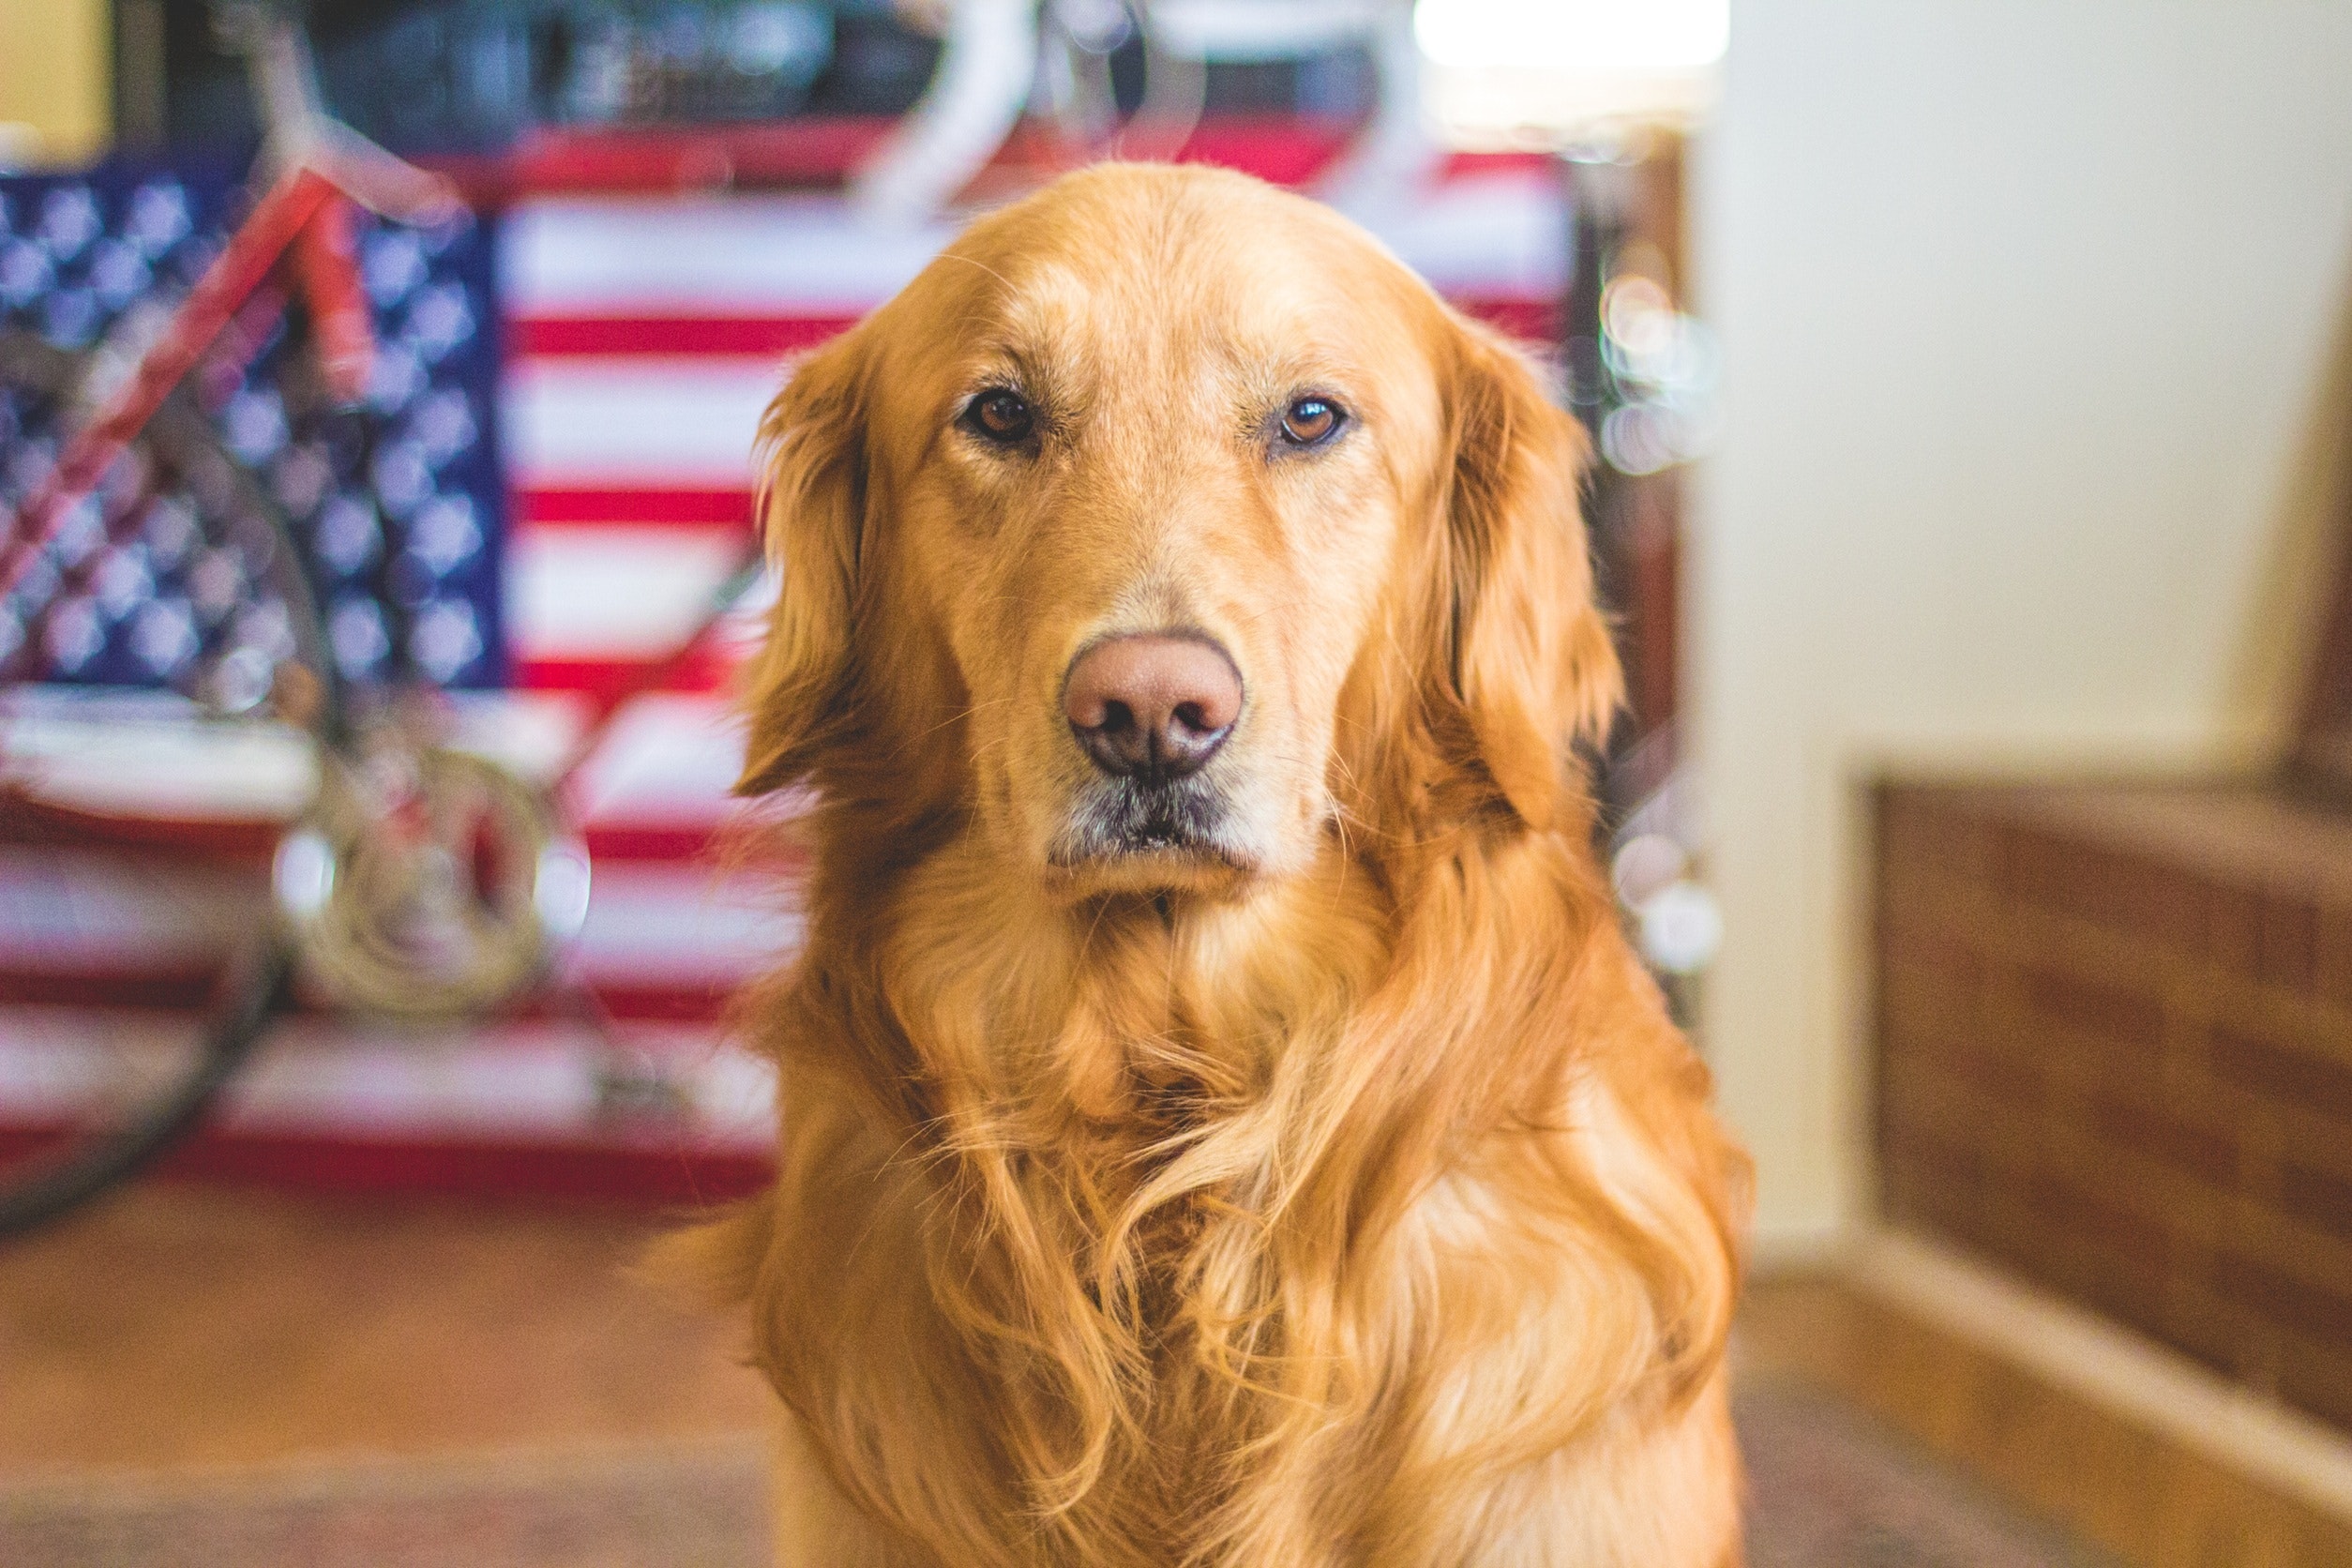 Physical characteristics of the Golden Retriever